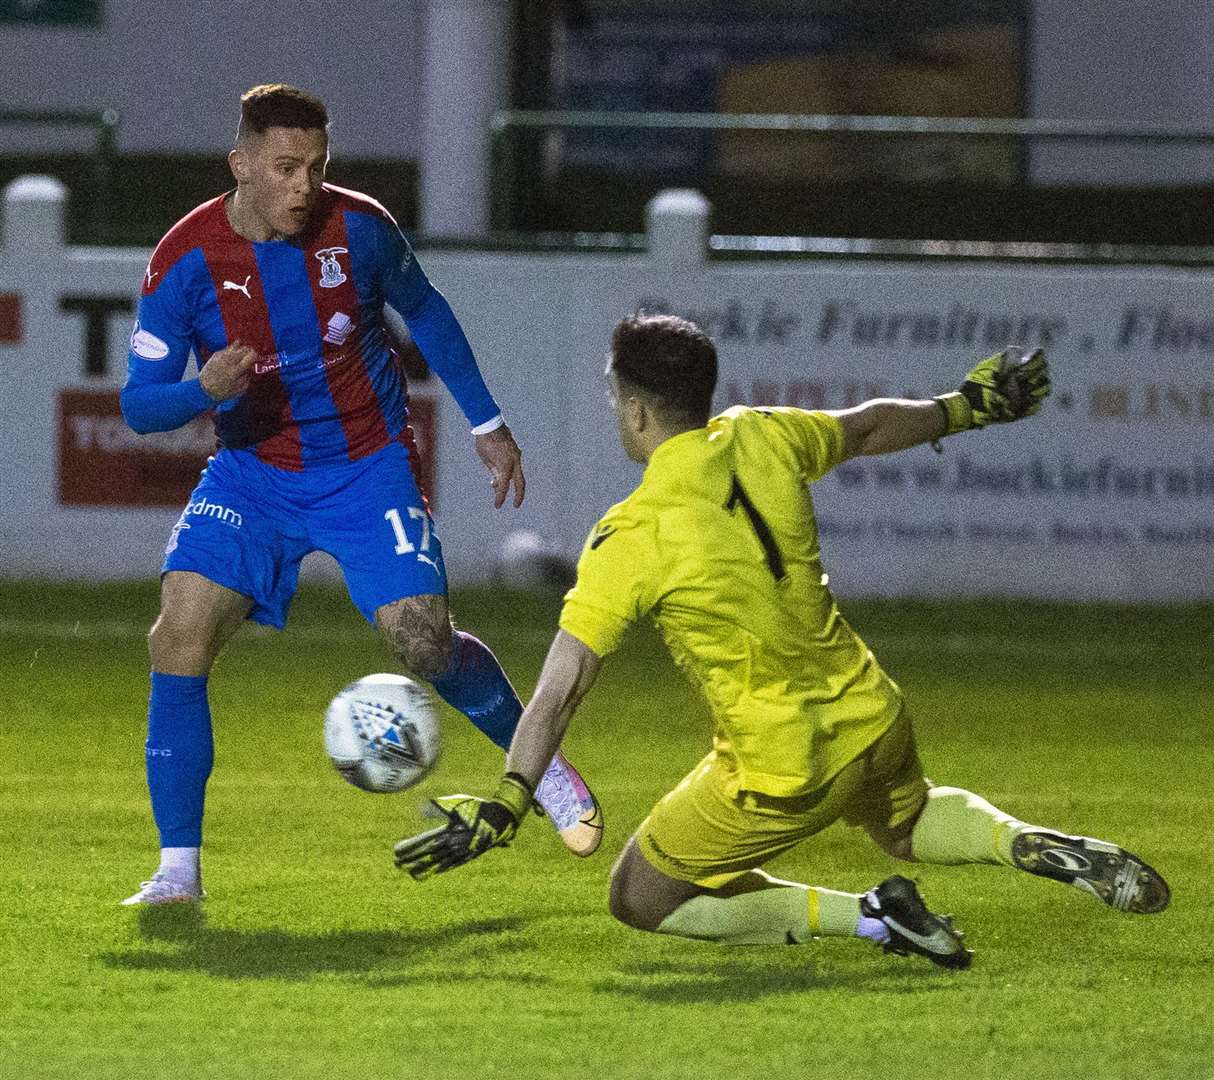 Miles Storey came close to scoring against Buckie on multiple occasions, getting denied this time by goalkeeper Daniel Bell. Picture: Ken Macpherson